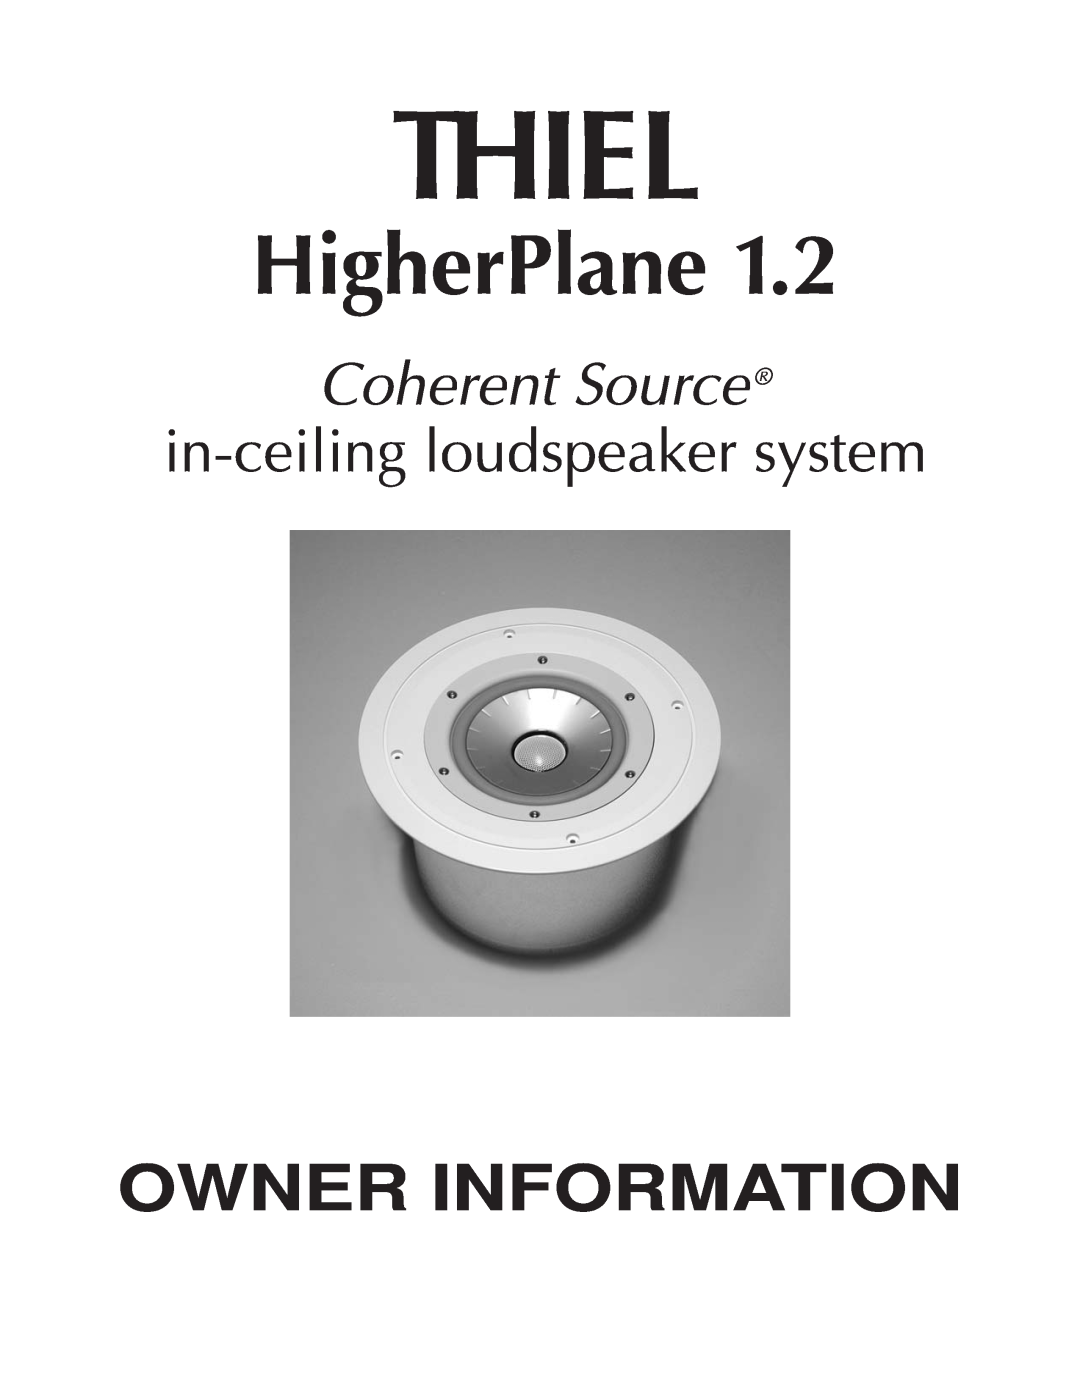 Thiel Audio Products 1.2 Coherent manual Thiel, HigherPlane, Owner Information, Coherent Source 